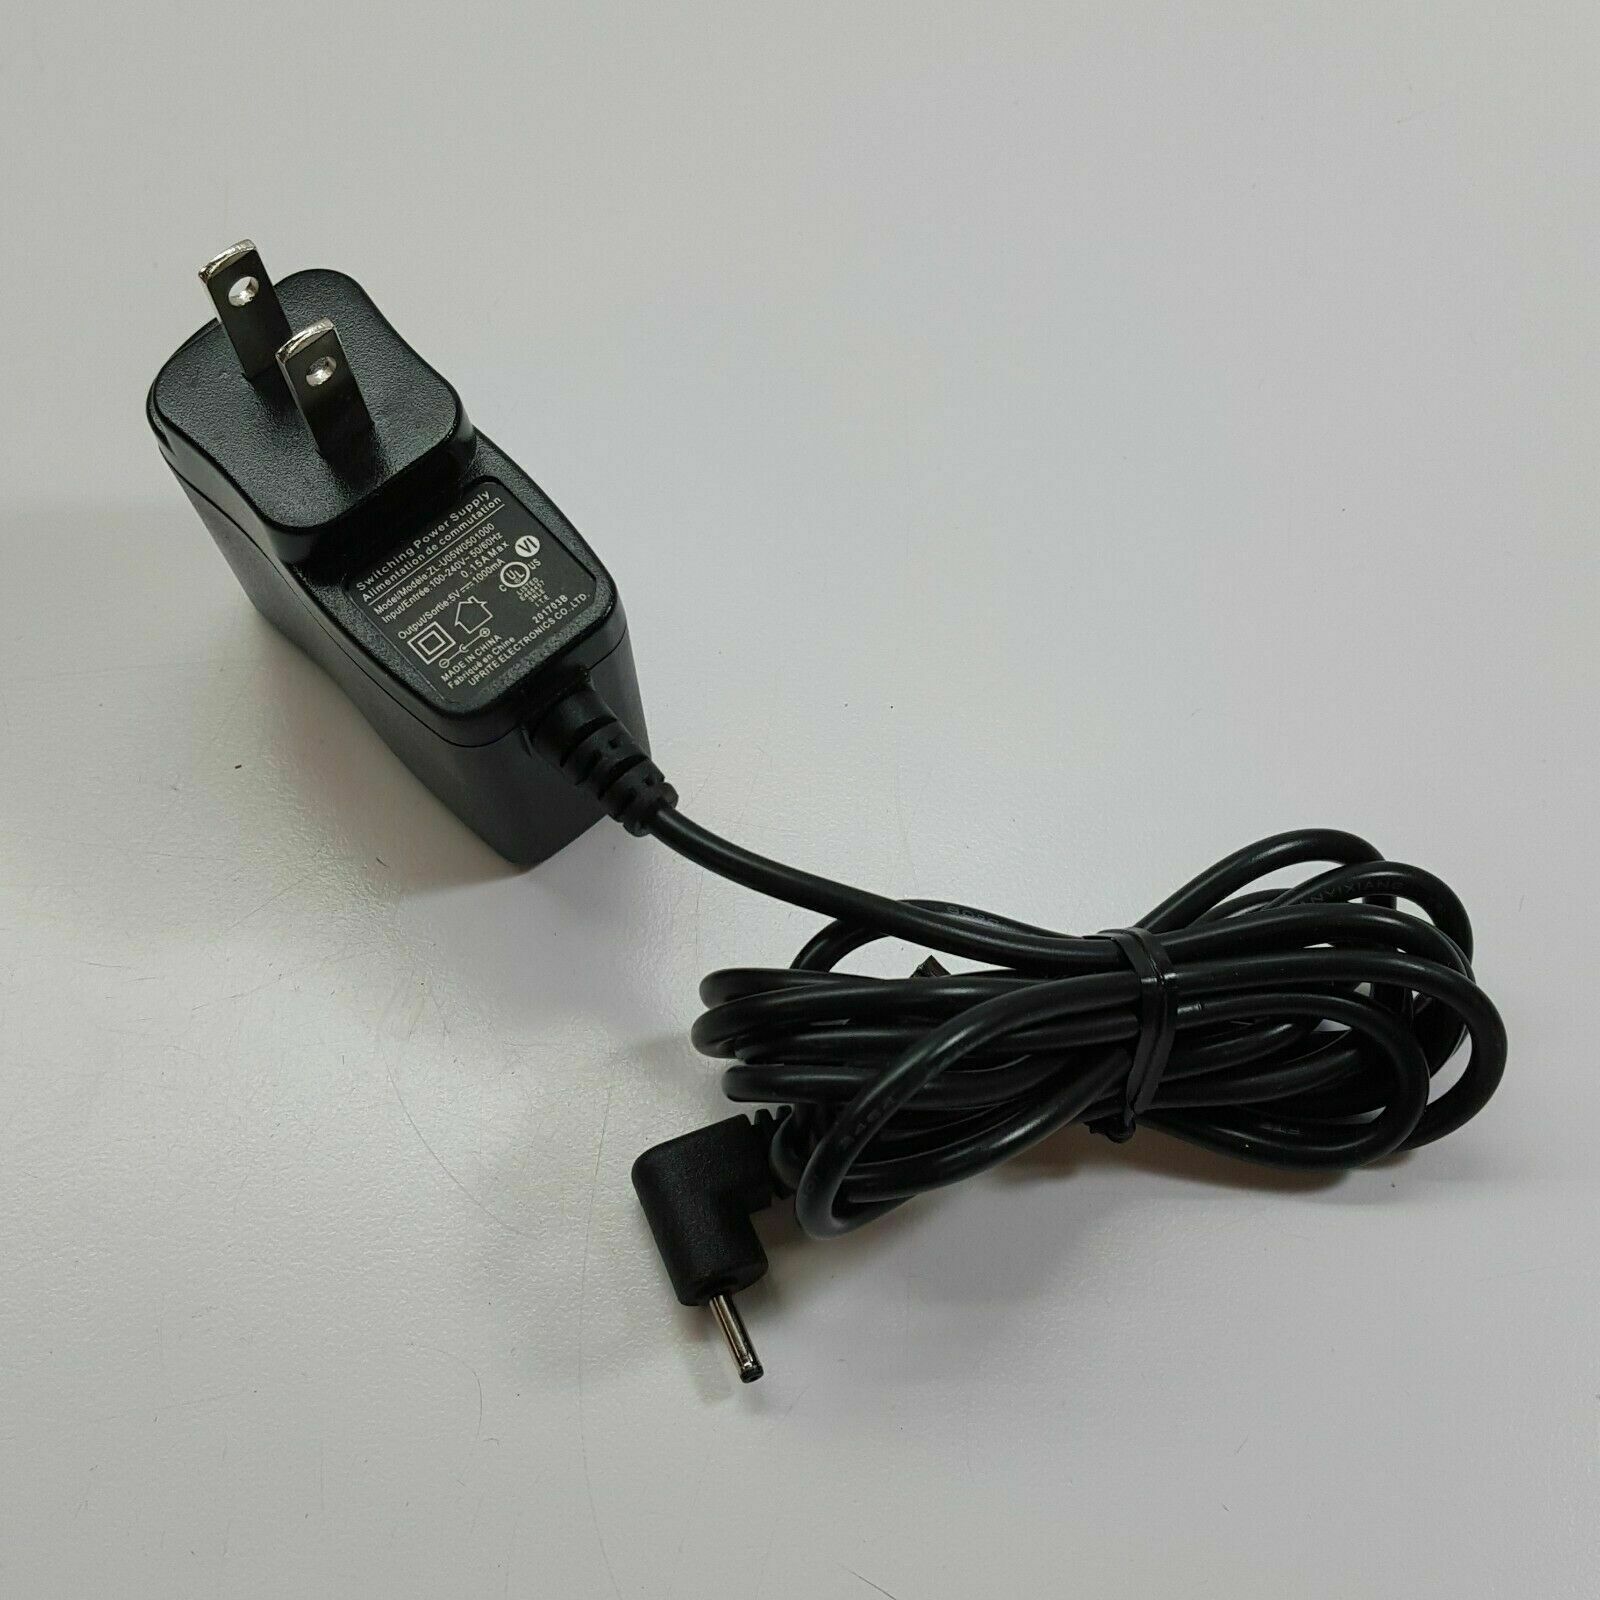 AC DC Power Supply Adapter Charger 5V 1000MA 1A ZL-U05W0501000 USA Type: Adapter Features: new Cable Length: 5 ft